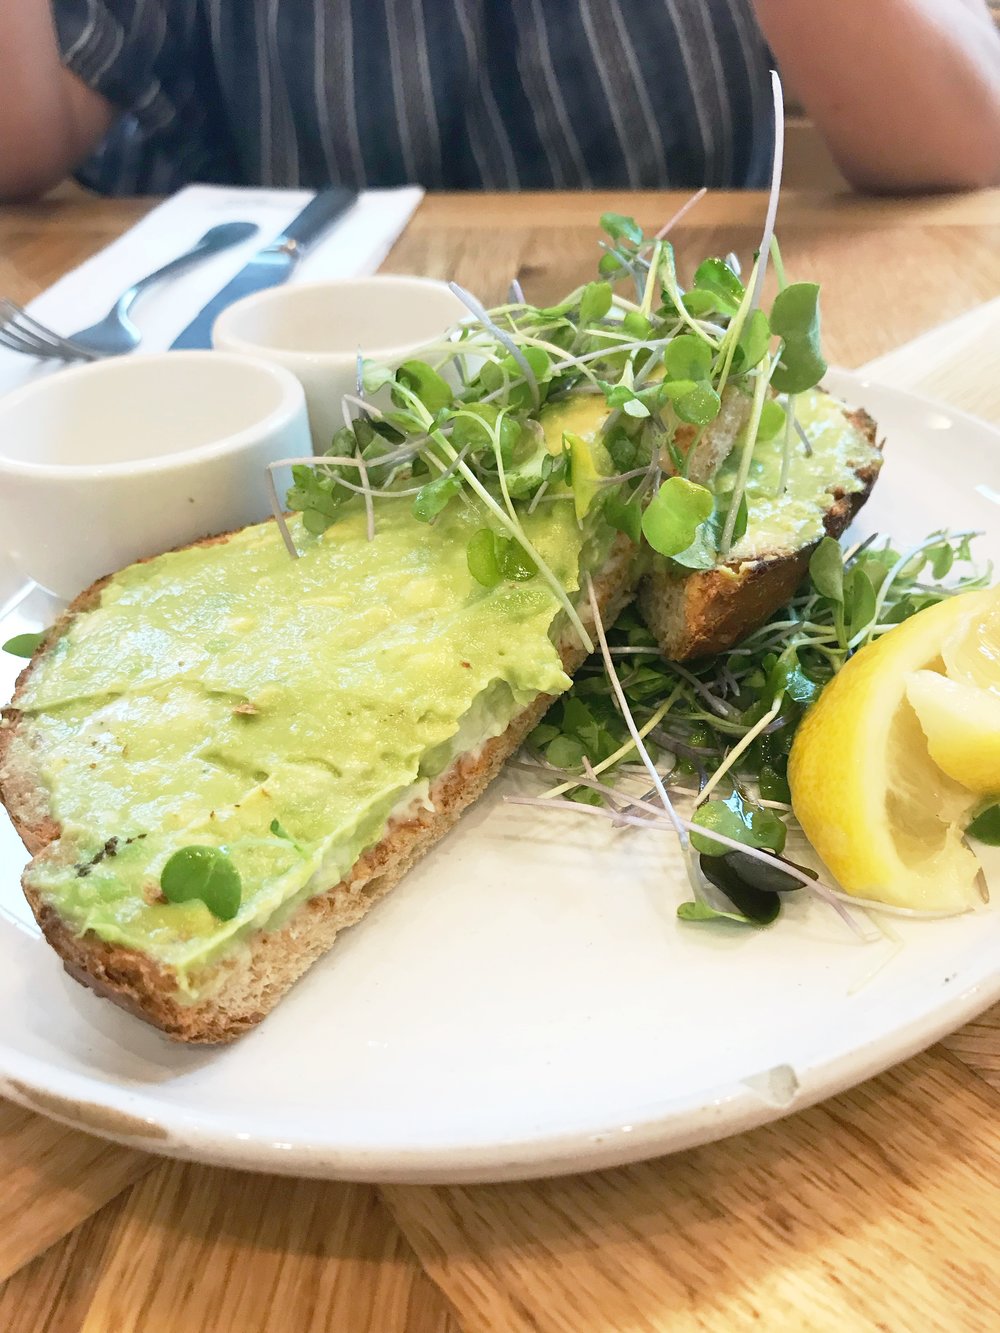  We started with the avocado toast and it did not disappoint. 